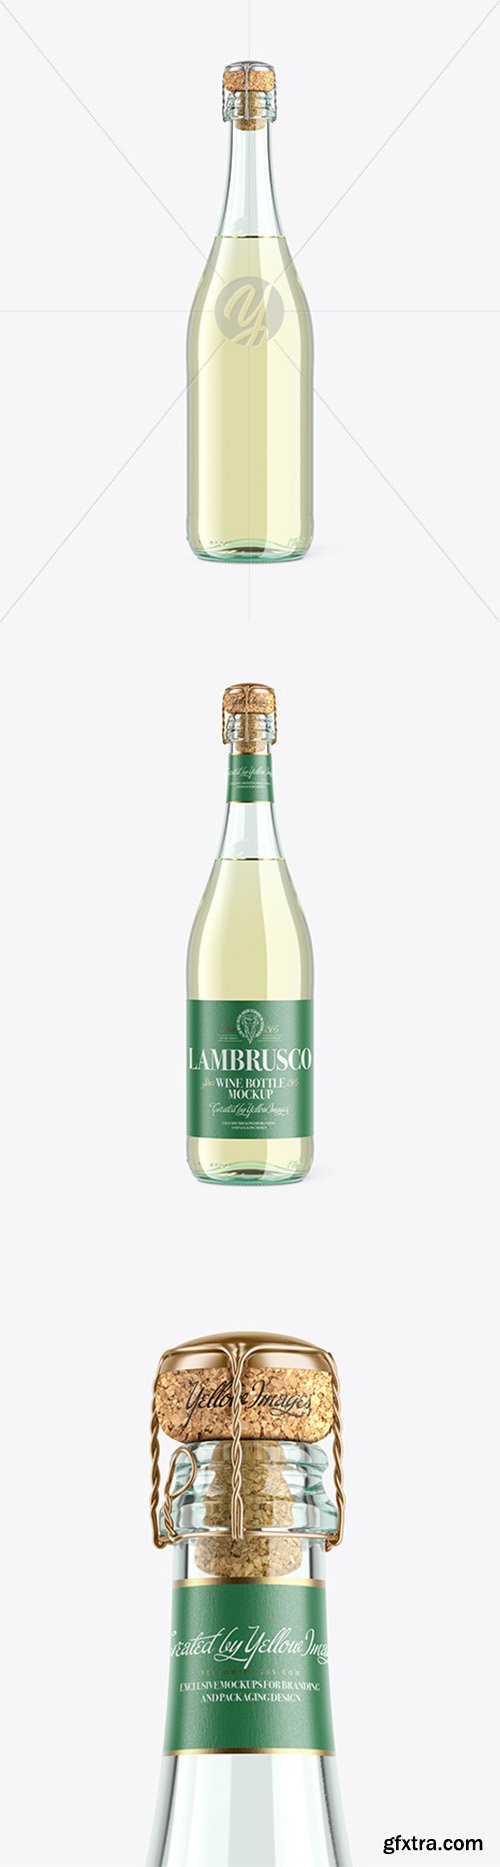 Clear Glass Lambrusco Bottle With White Wine Mockup 62602